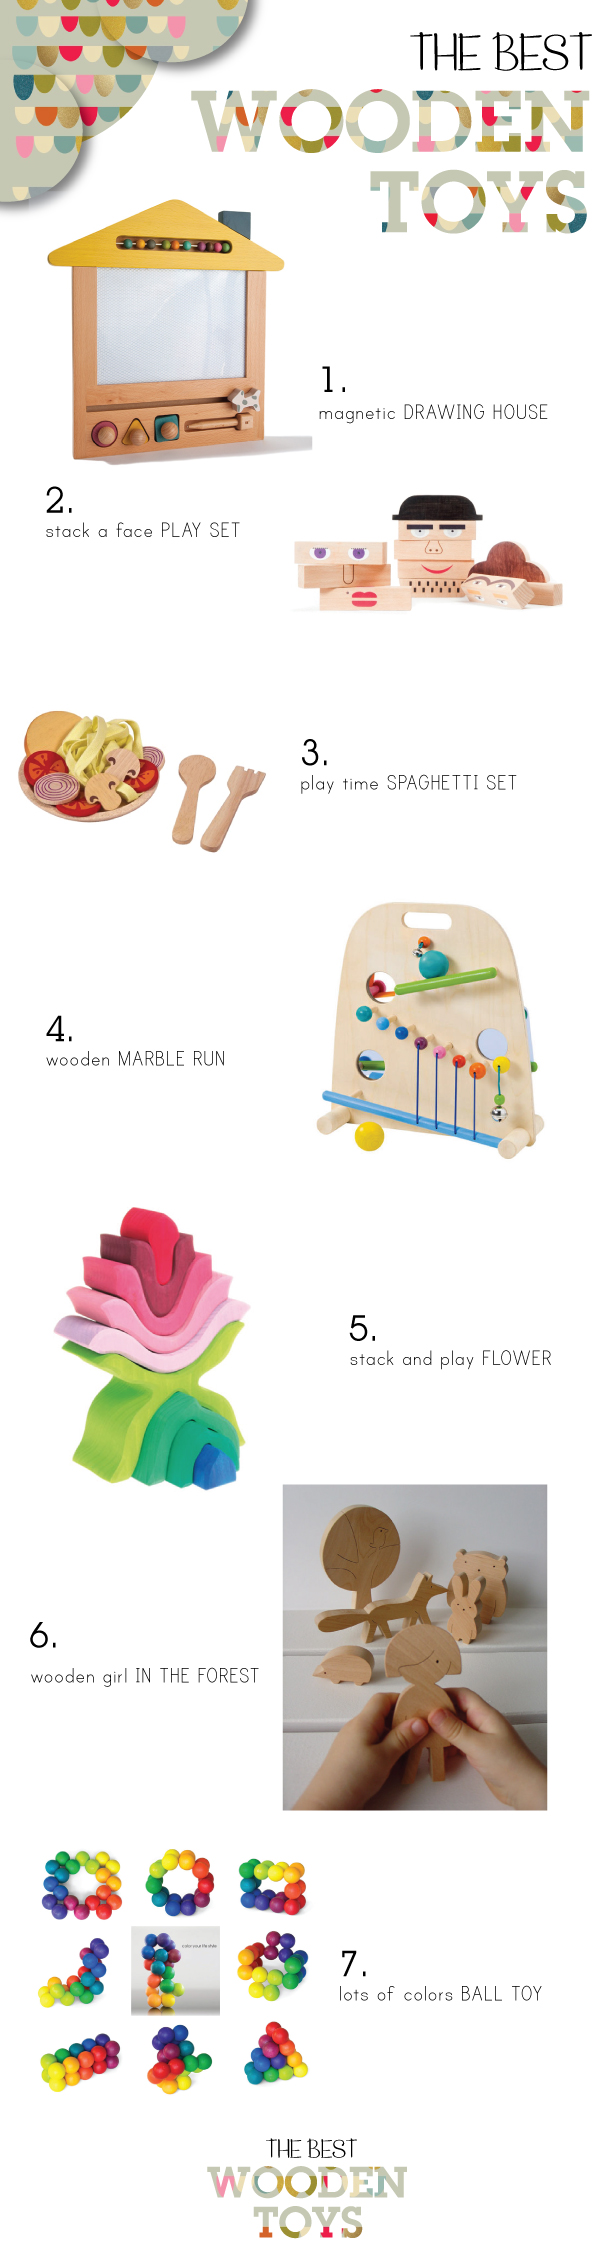 5 Benefits of Playing with Marble Runs